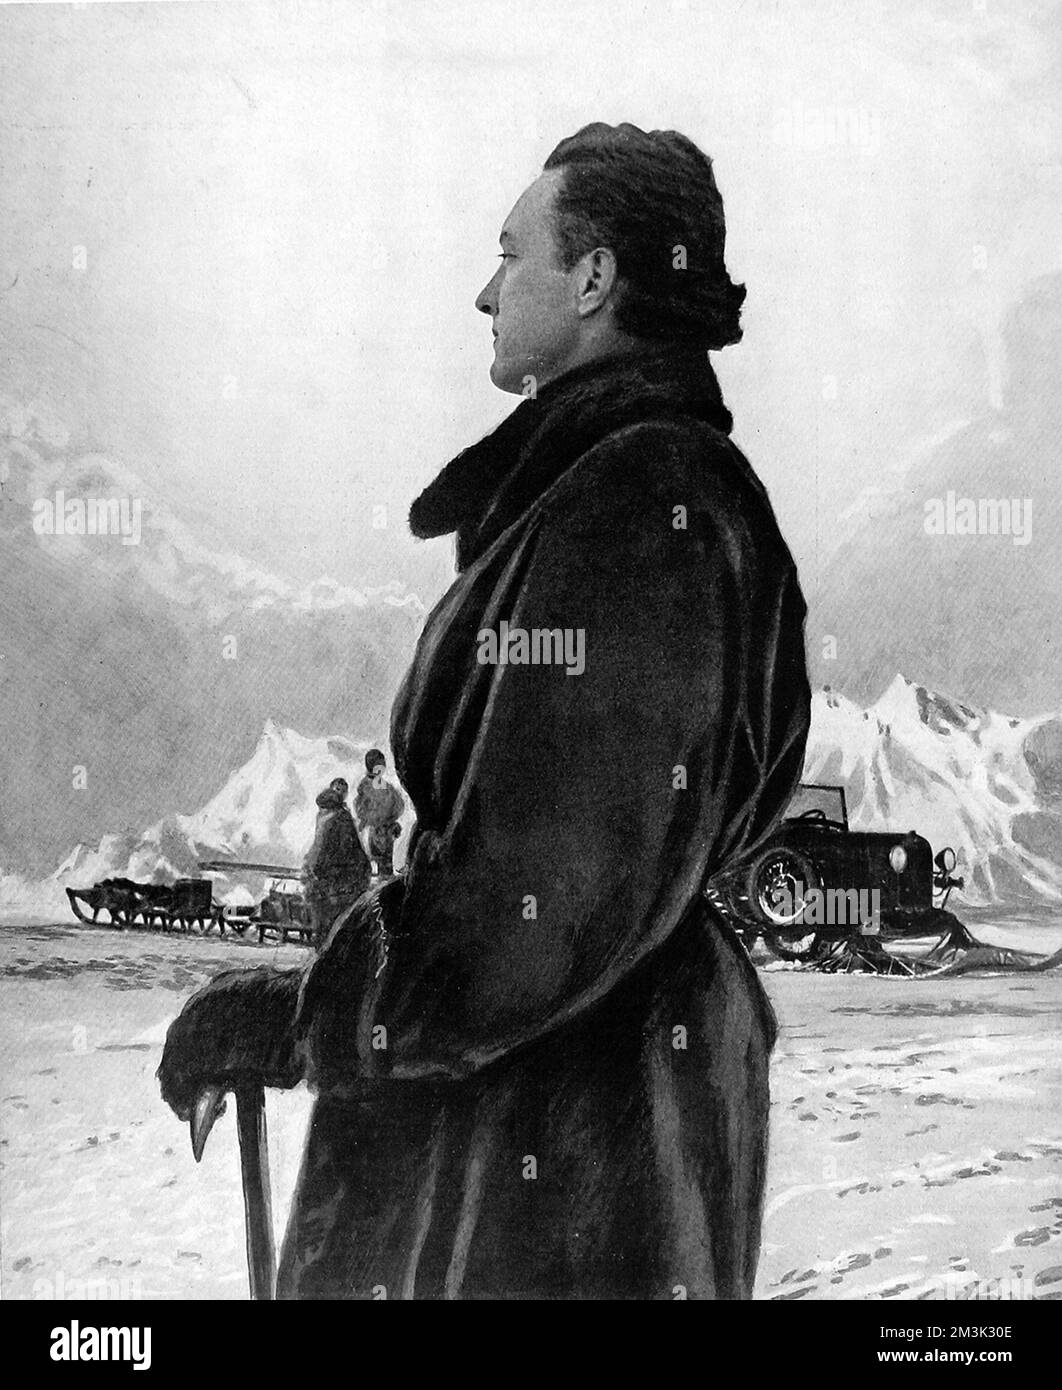 Rear-Admiral Richard Byrd (1888 - 1957), American explorer, pictured in Antarctica.   Admiral Byrd made a number of expeditions to the Polar regions and was the first person to fly over both the North and South Poles. Stock Photo